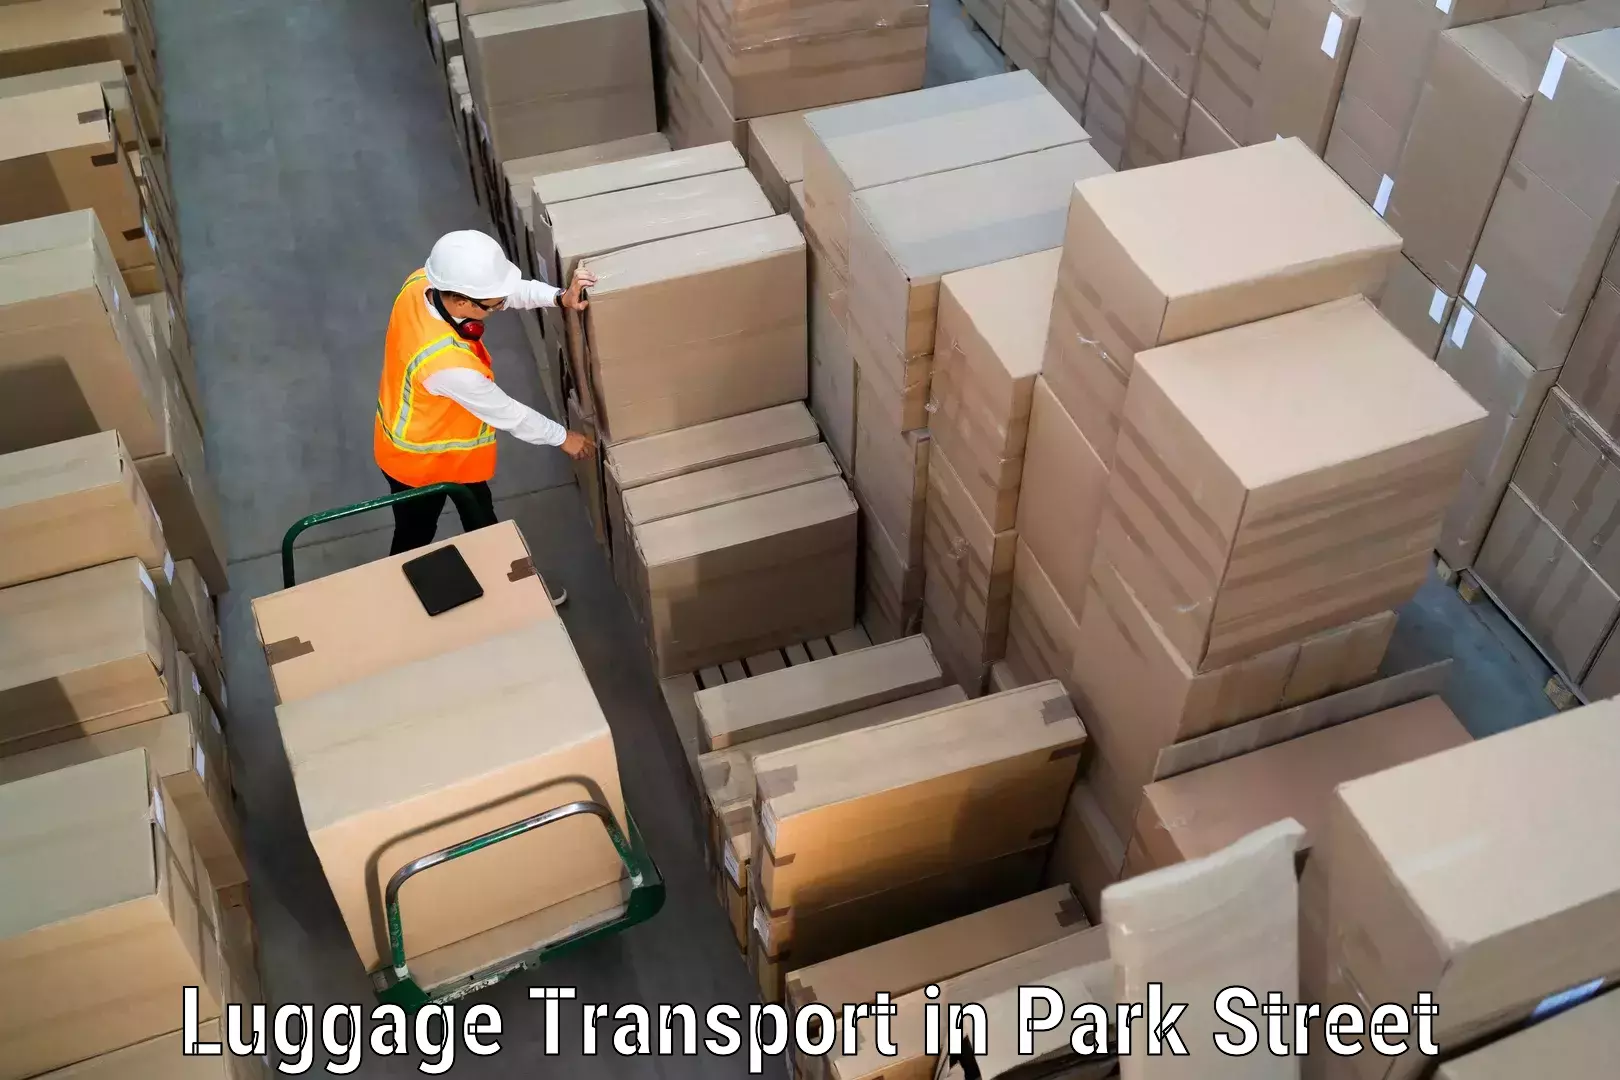 Luggage delivery operations in Park Street